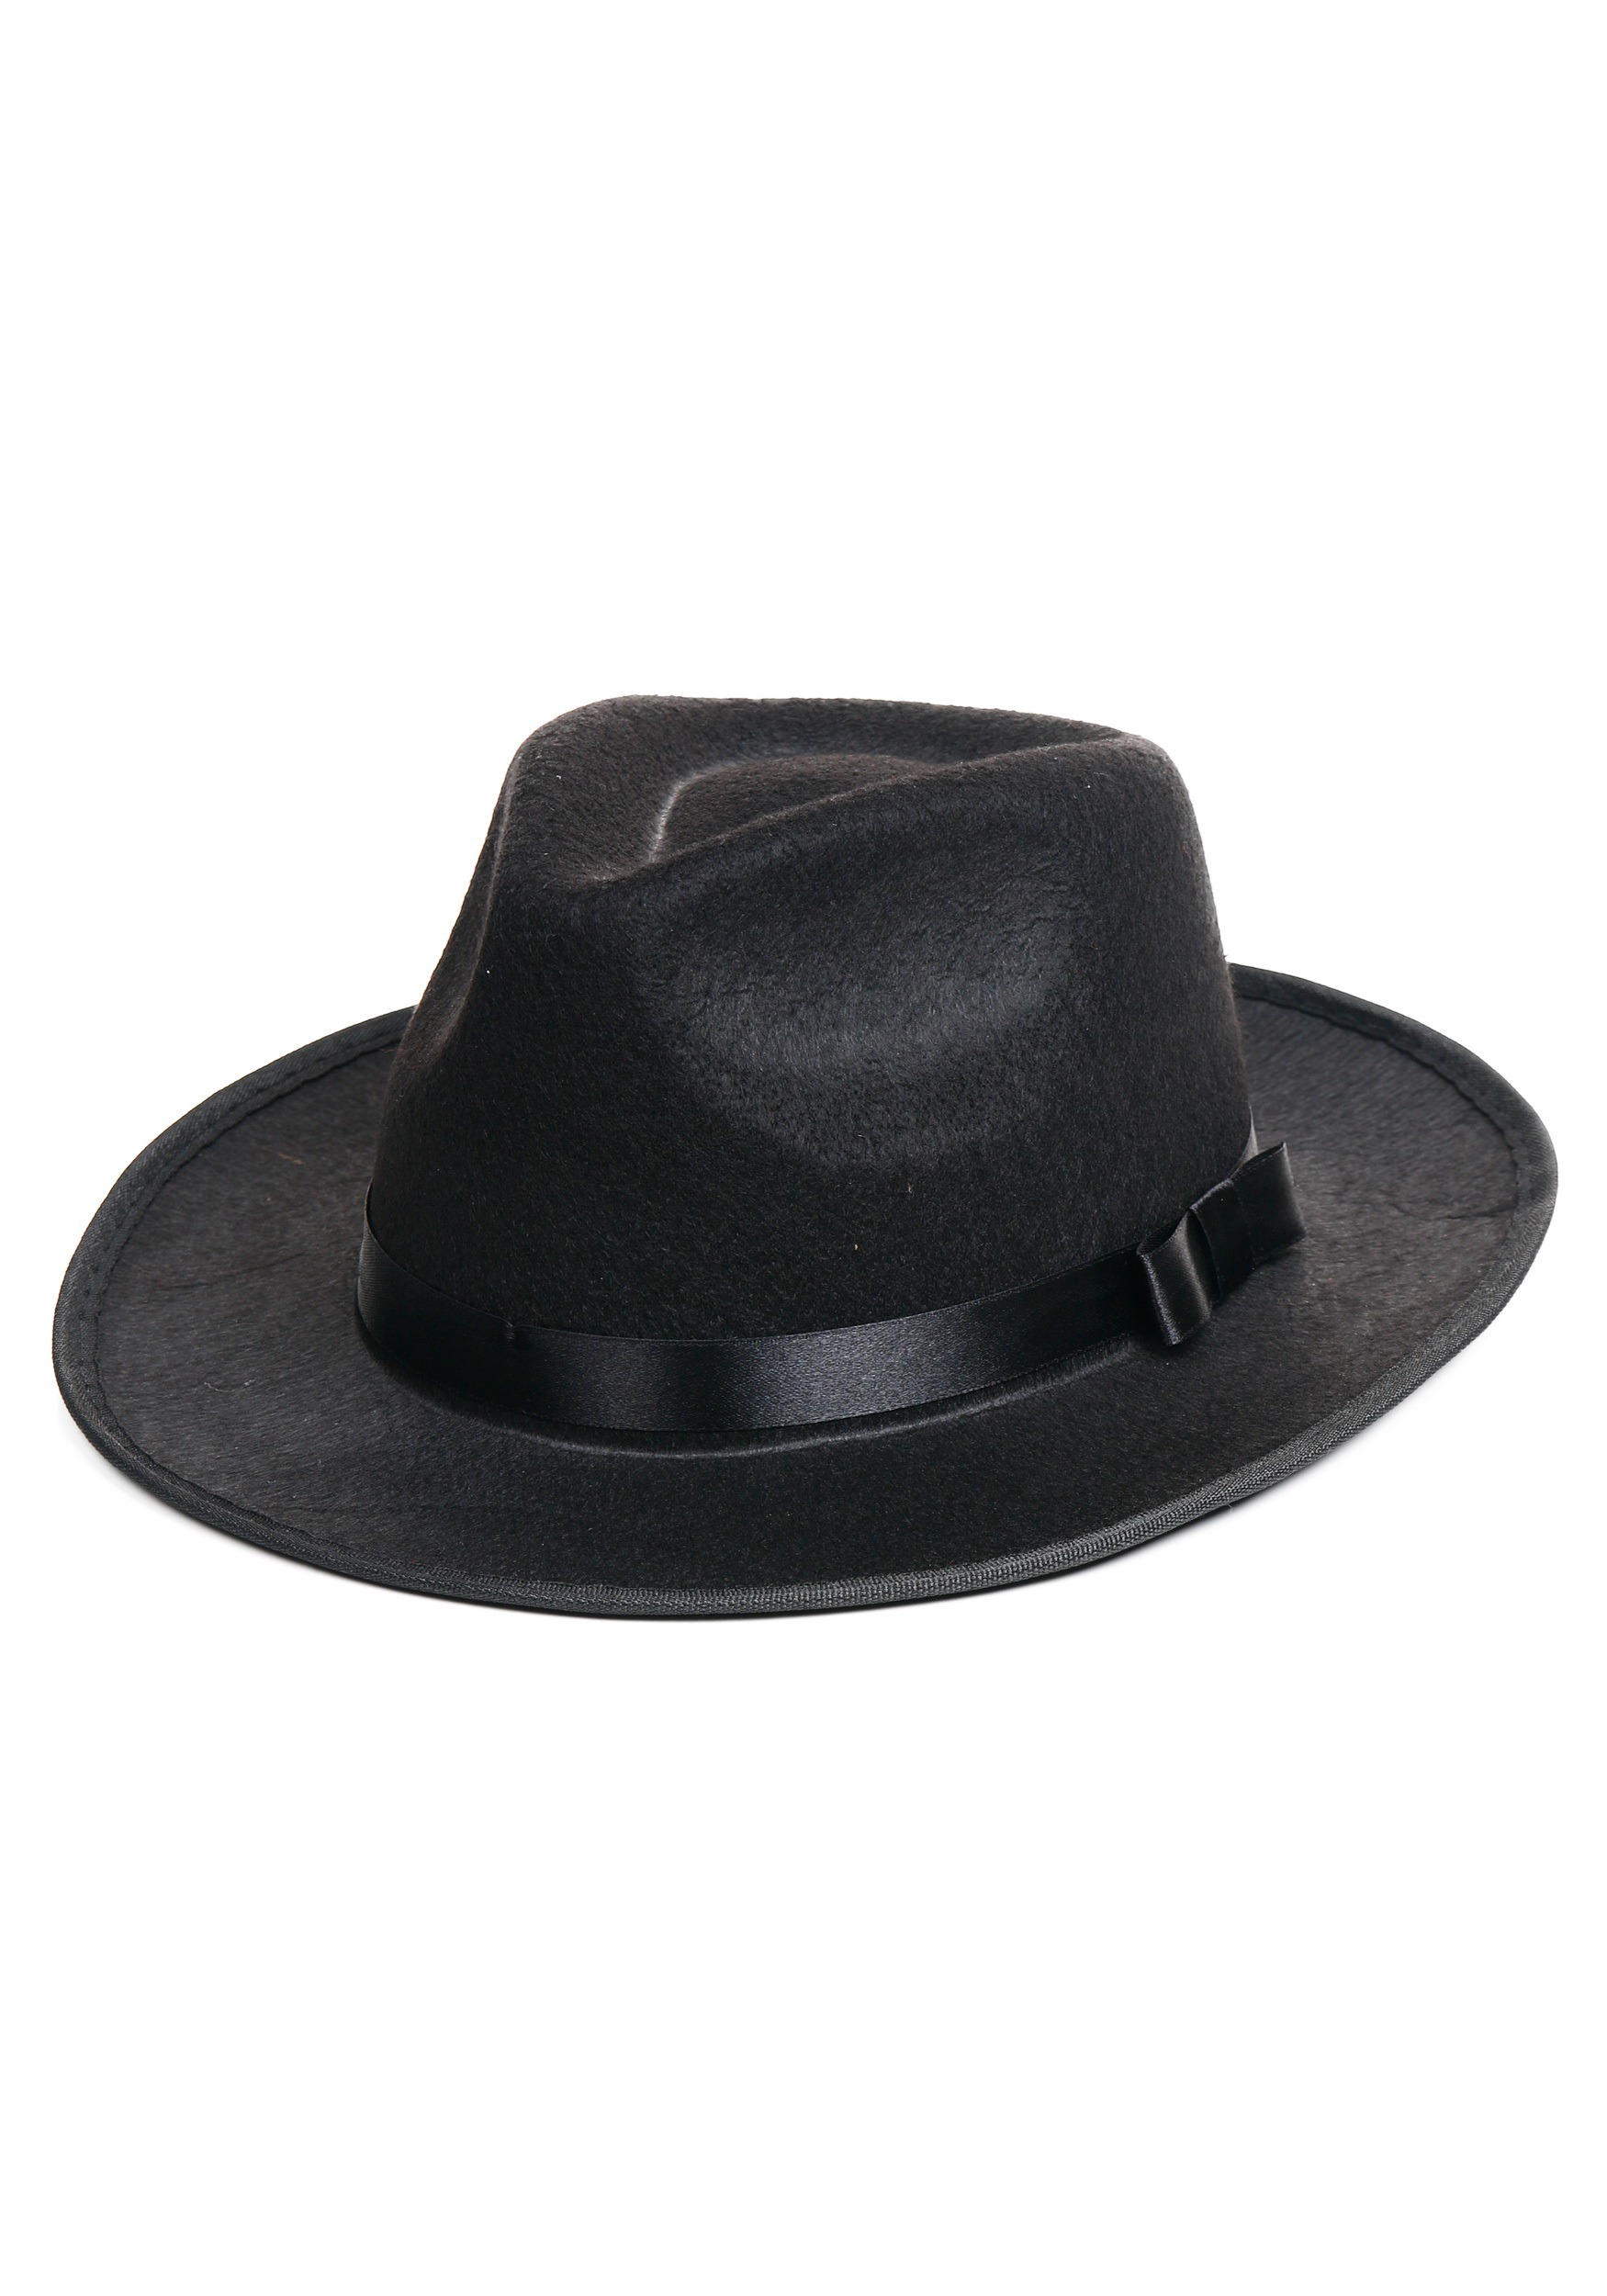 Black Gangster Hat Accessory , Gangster Accessories